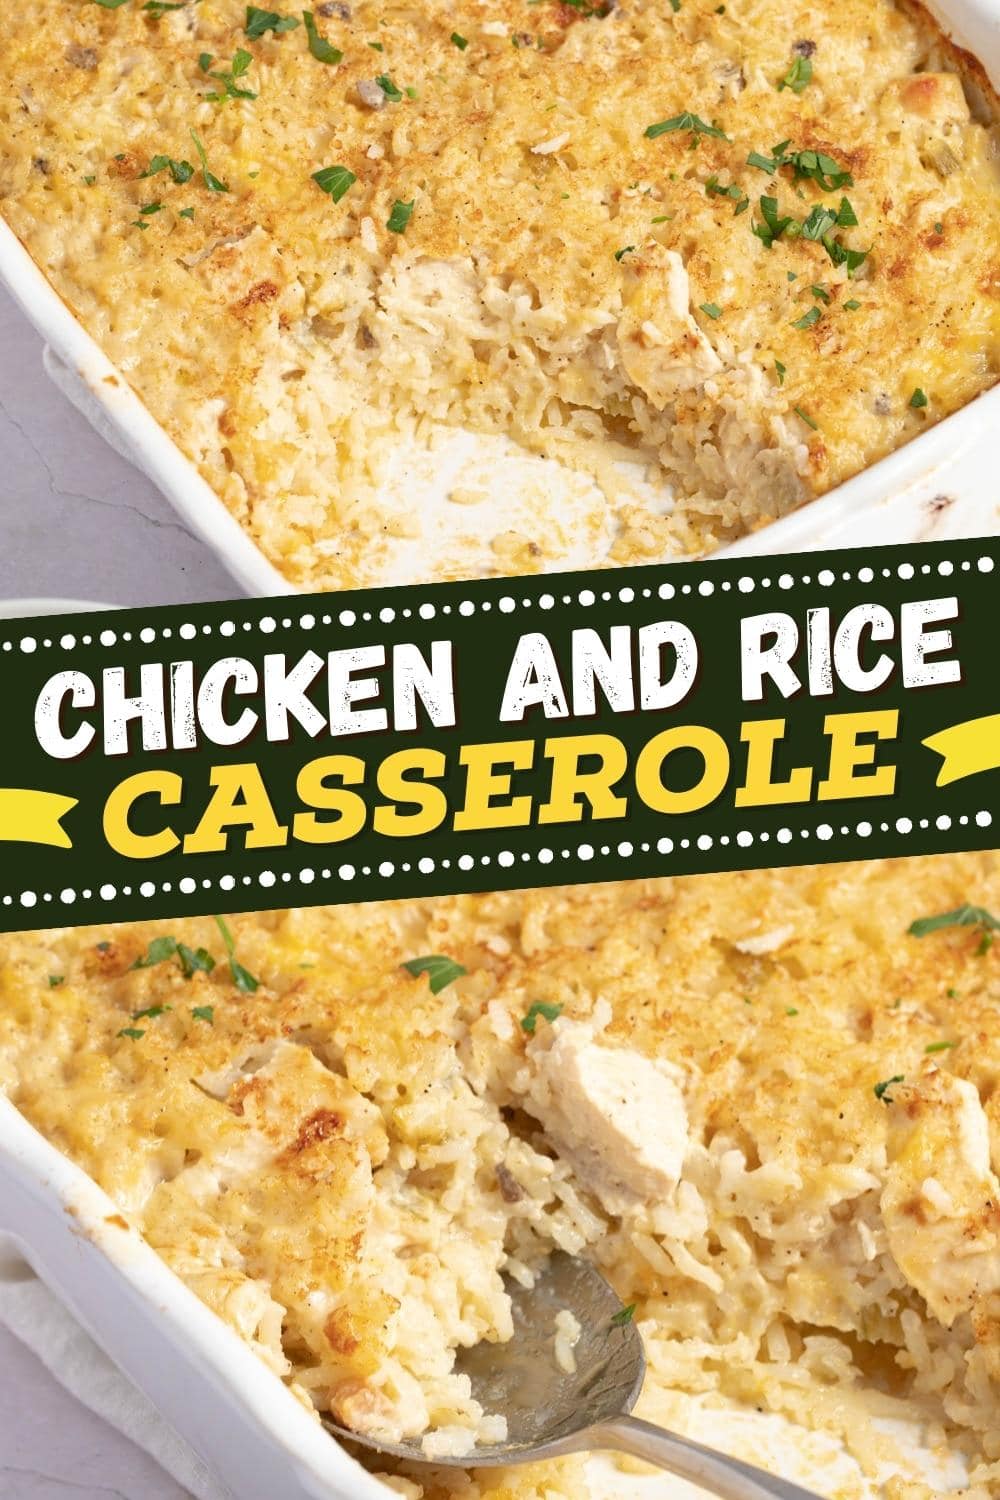 Chicken and Rice Casserole (Old-Fashioned Recipe) - Insanely Good